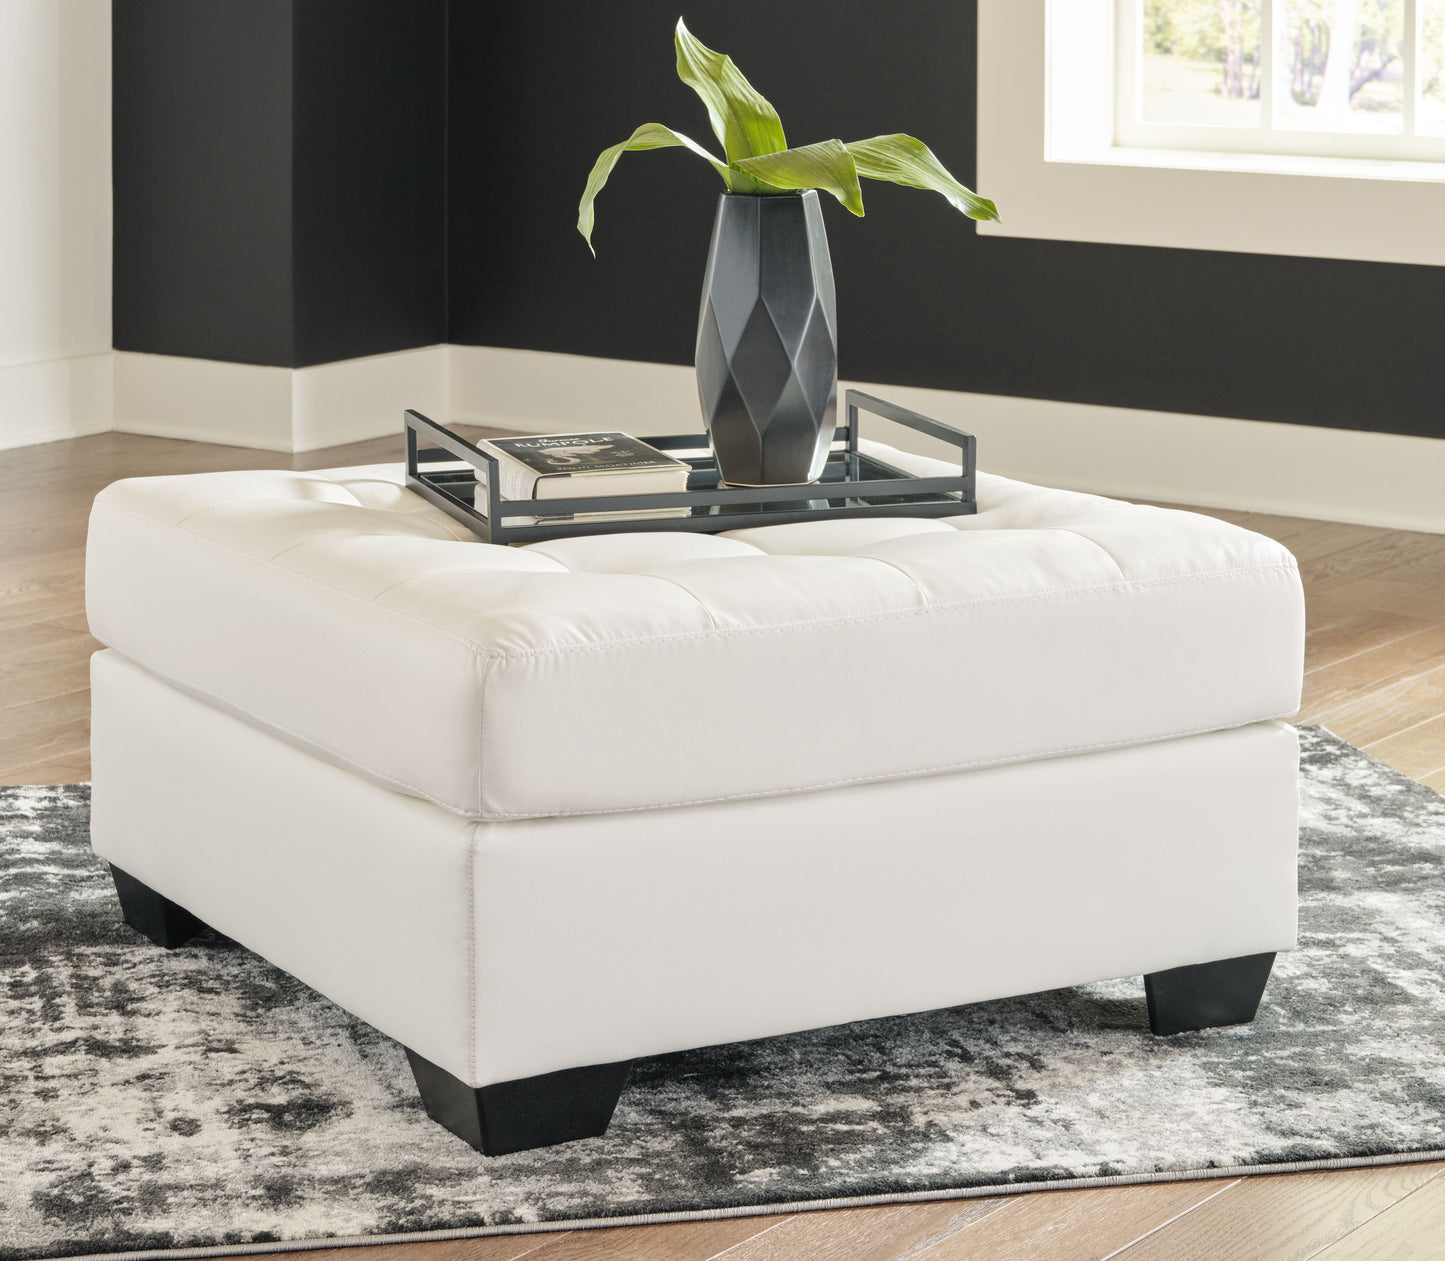 Donlen - White - 3 Pc. - Right Arm Facing Corner Chaise 2 Pc Sectional, Ottoman